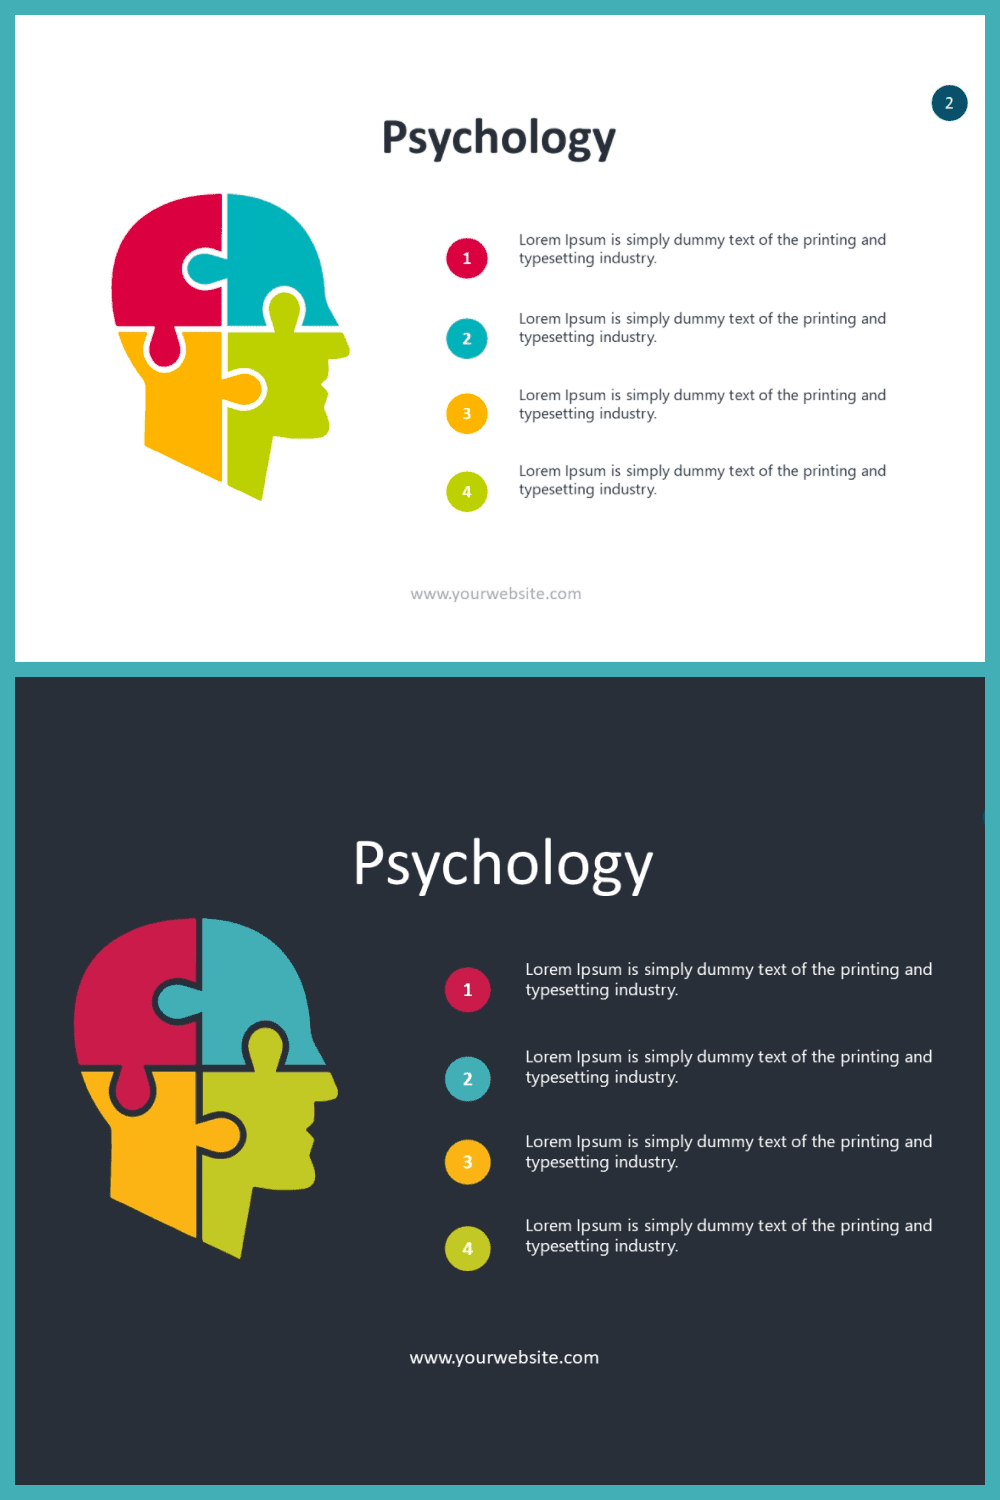 Psychology powerpoint infographics template.